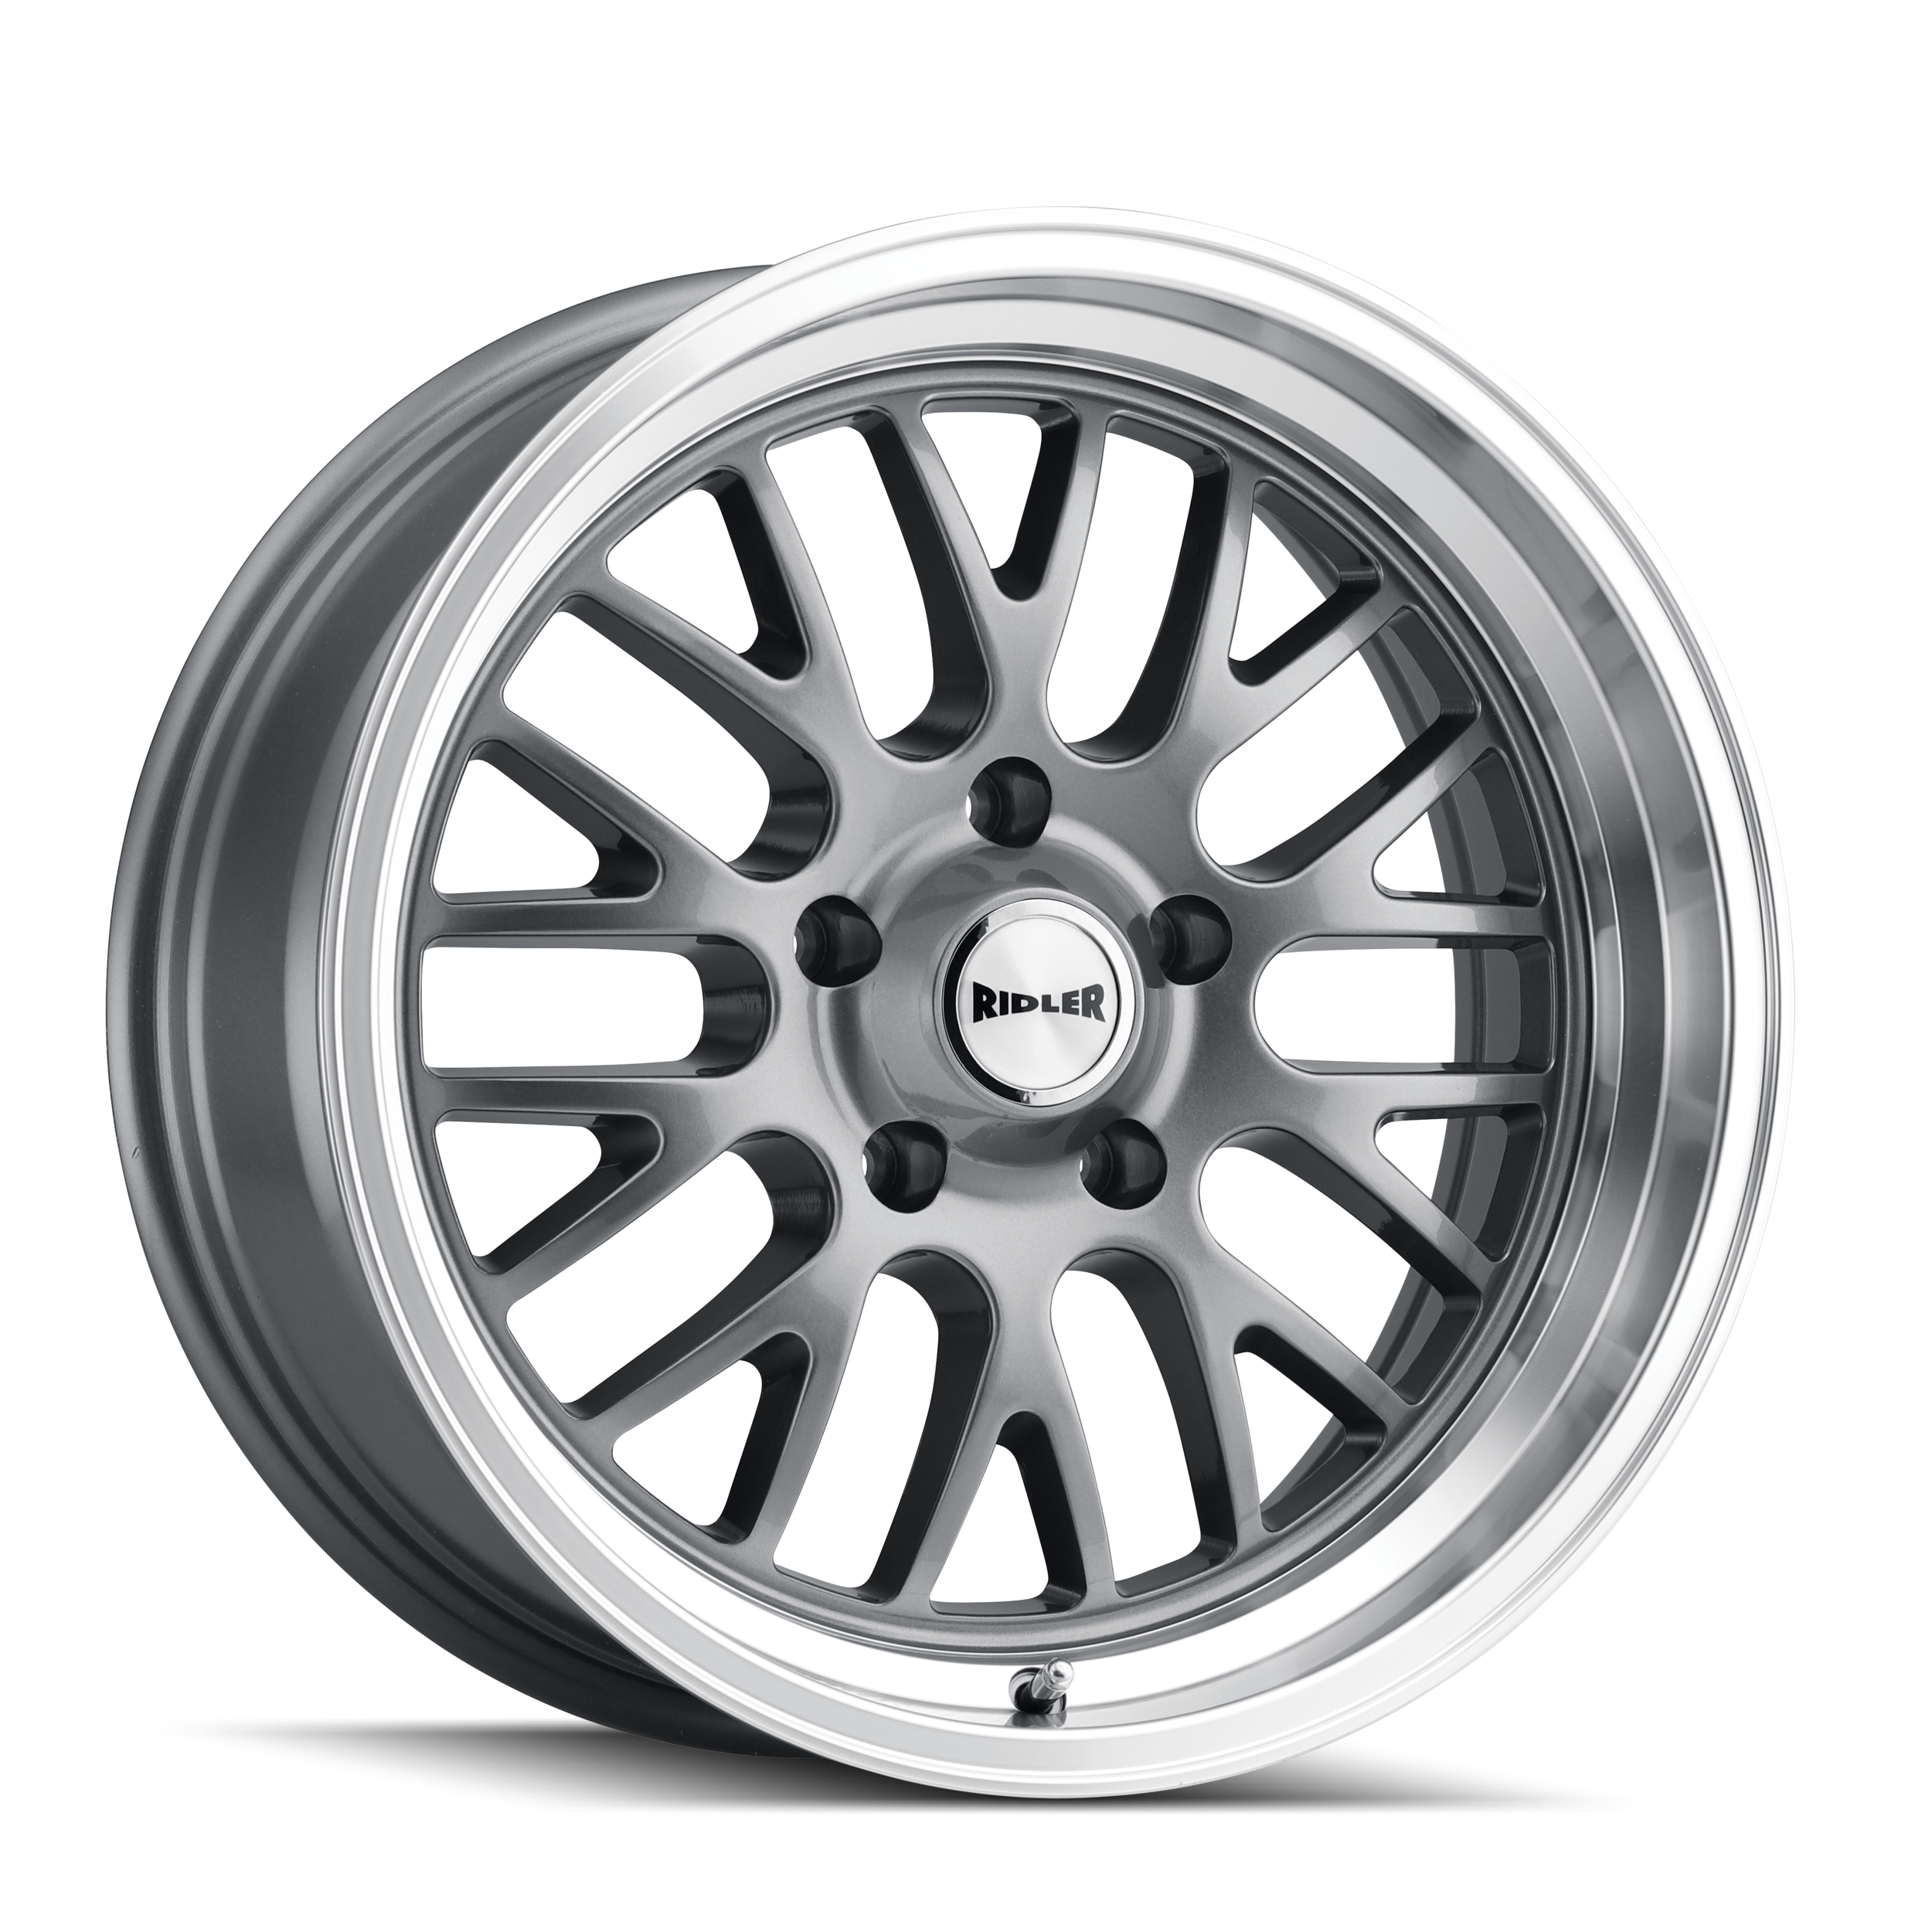 18 x 9.5 inches /5 x 83 mm, 6 mm Offset Ridler Custom Wheels 607 Grey W/MACHINED Lip Wheel with Alloy Steel 